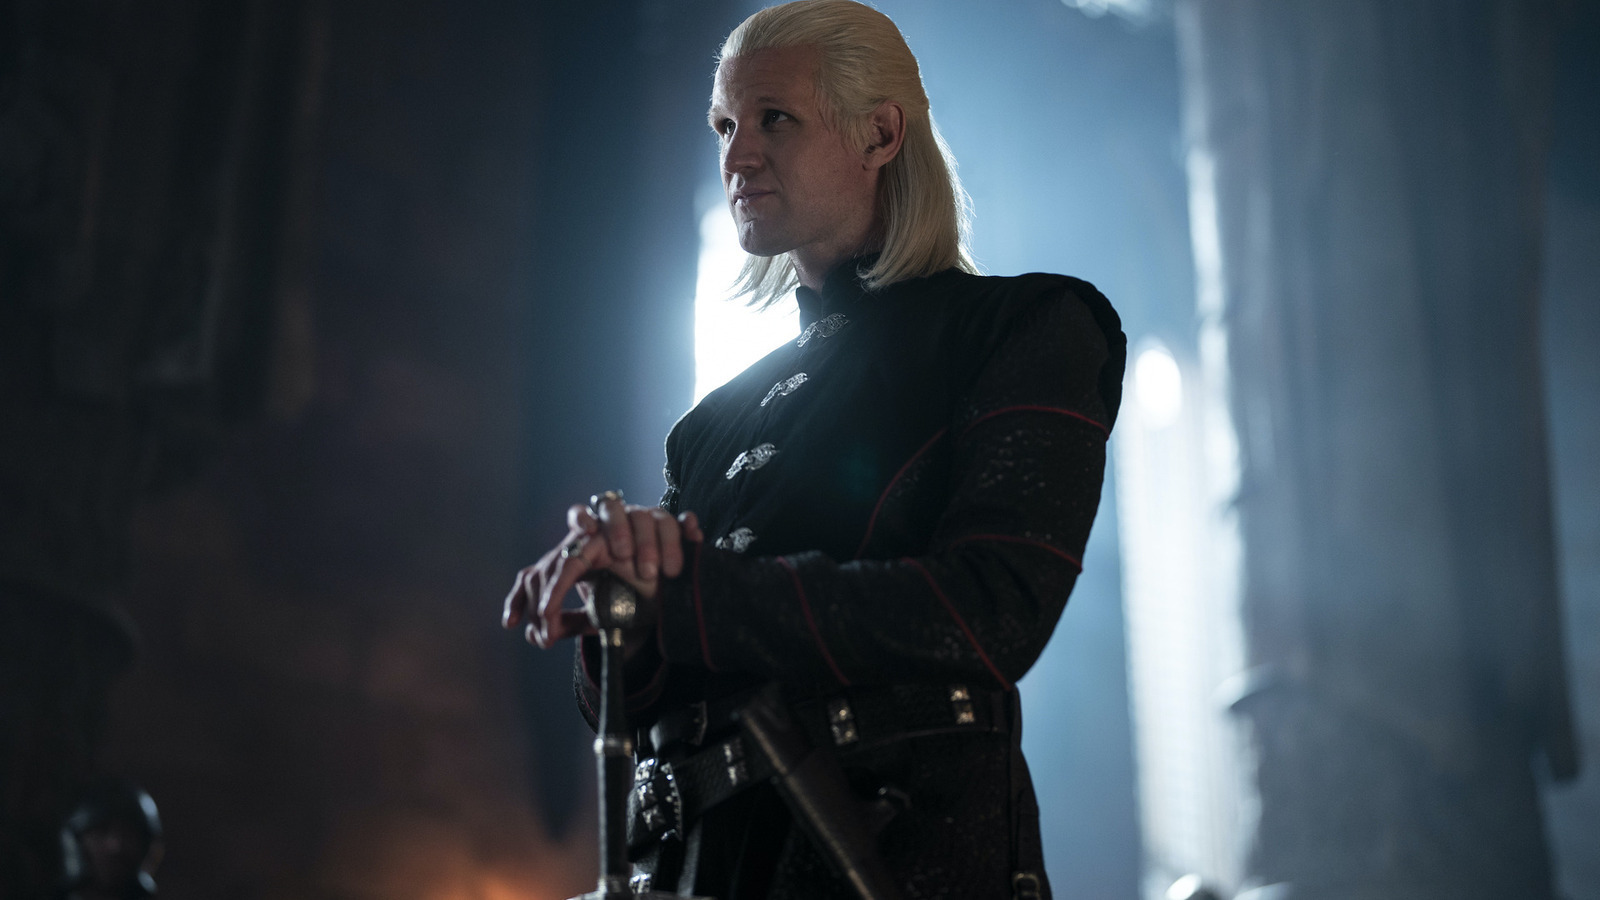 https://www.slashfilm.com/img/gallery/matt-smiths-daemon-targaryen-is-there-to-cause-chaos-in-house-of-the-dragon/l-intro-1659377882.jpg